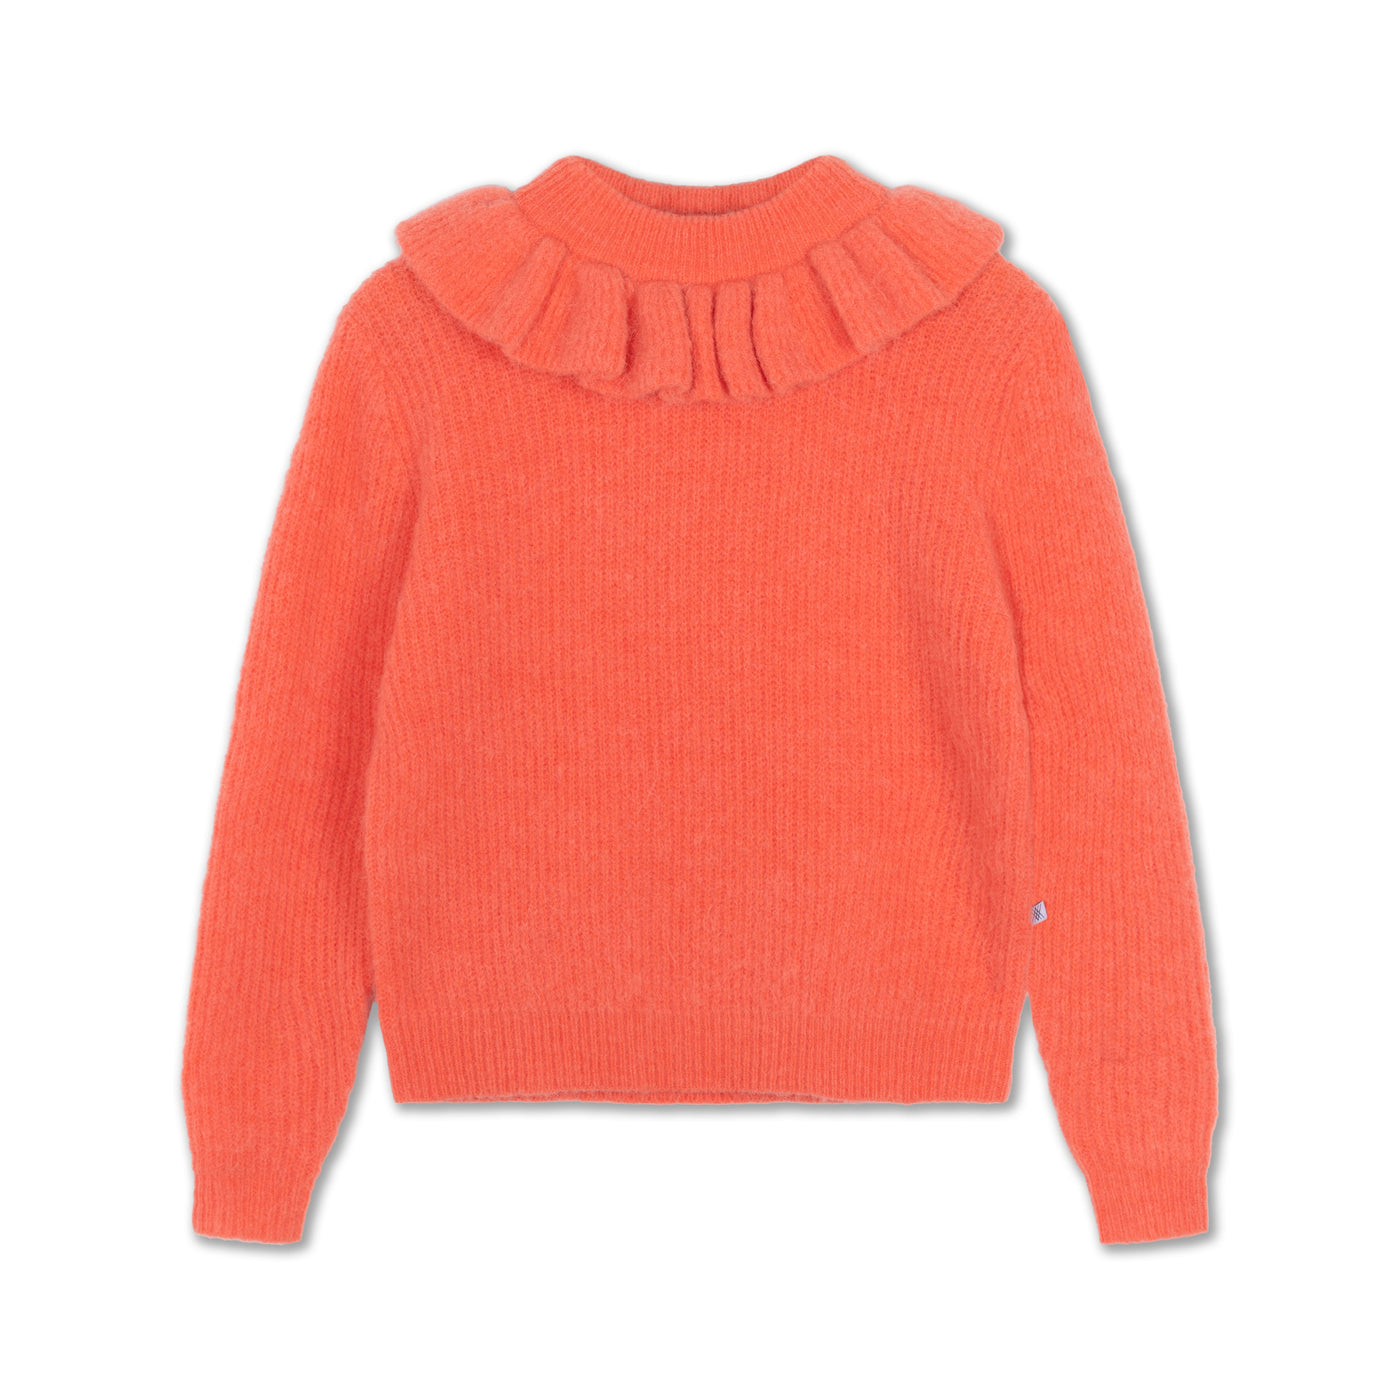 knit ruffle sweater - bright coral